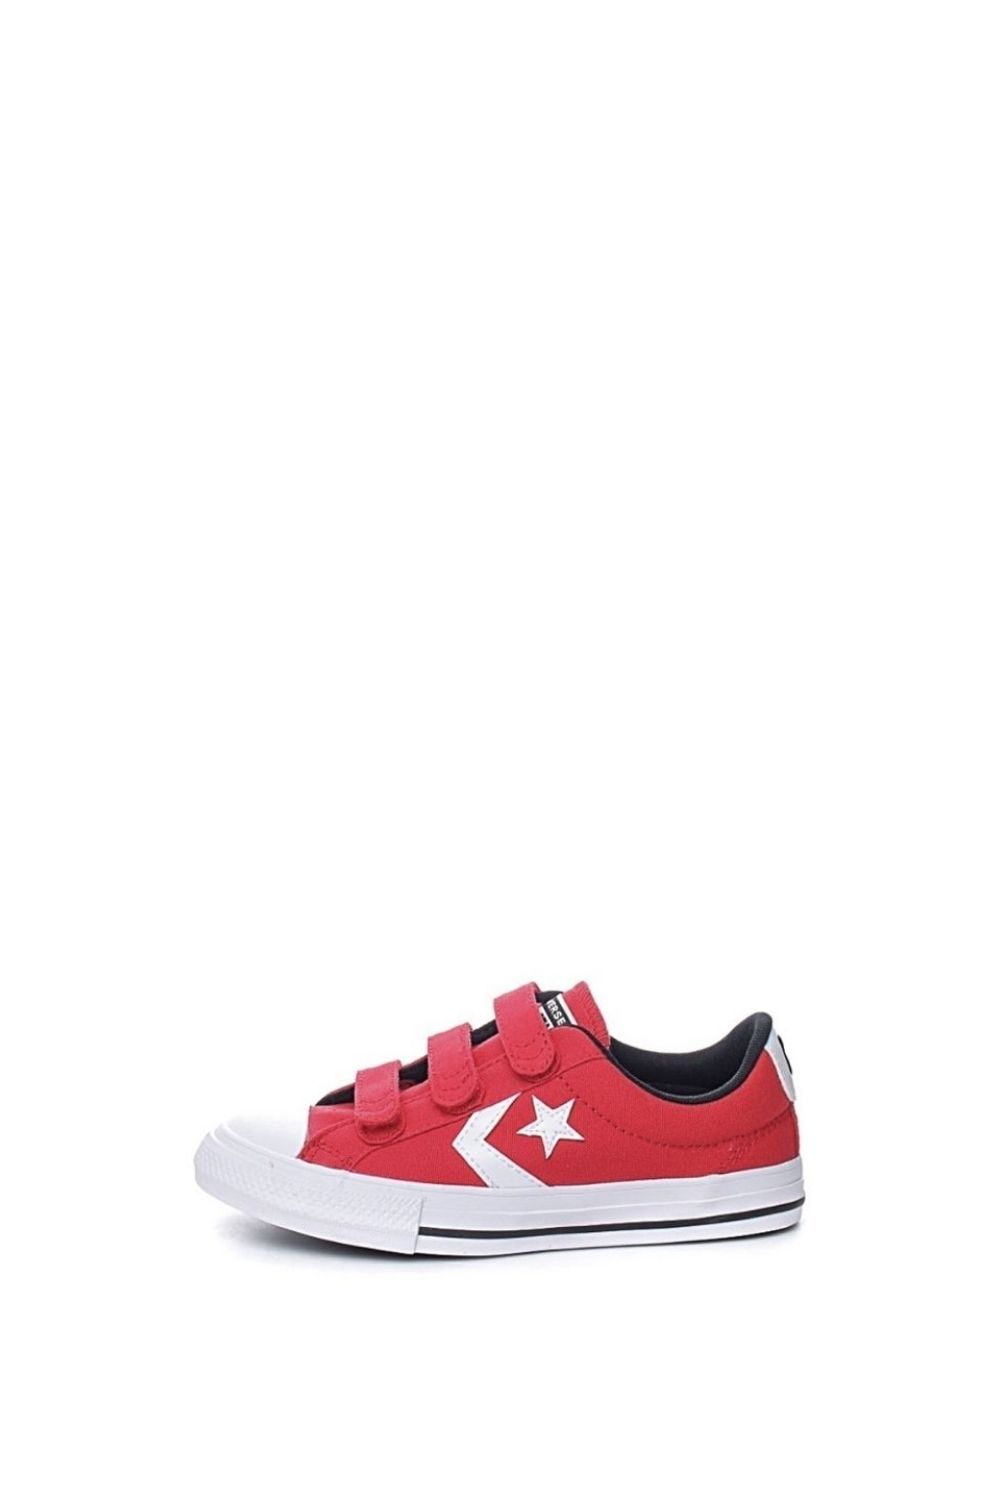 CONVERSE - Παιδικά sneakers CONVERSE STAR PLAYER 3V CANVAS κόκκινα Παιδικά/Boys/Παπούτσια/Sneakers